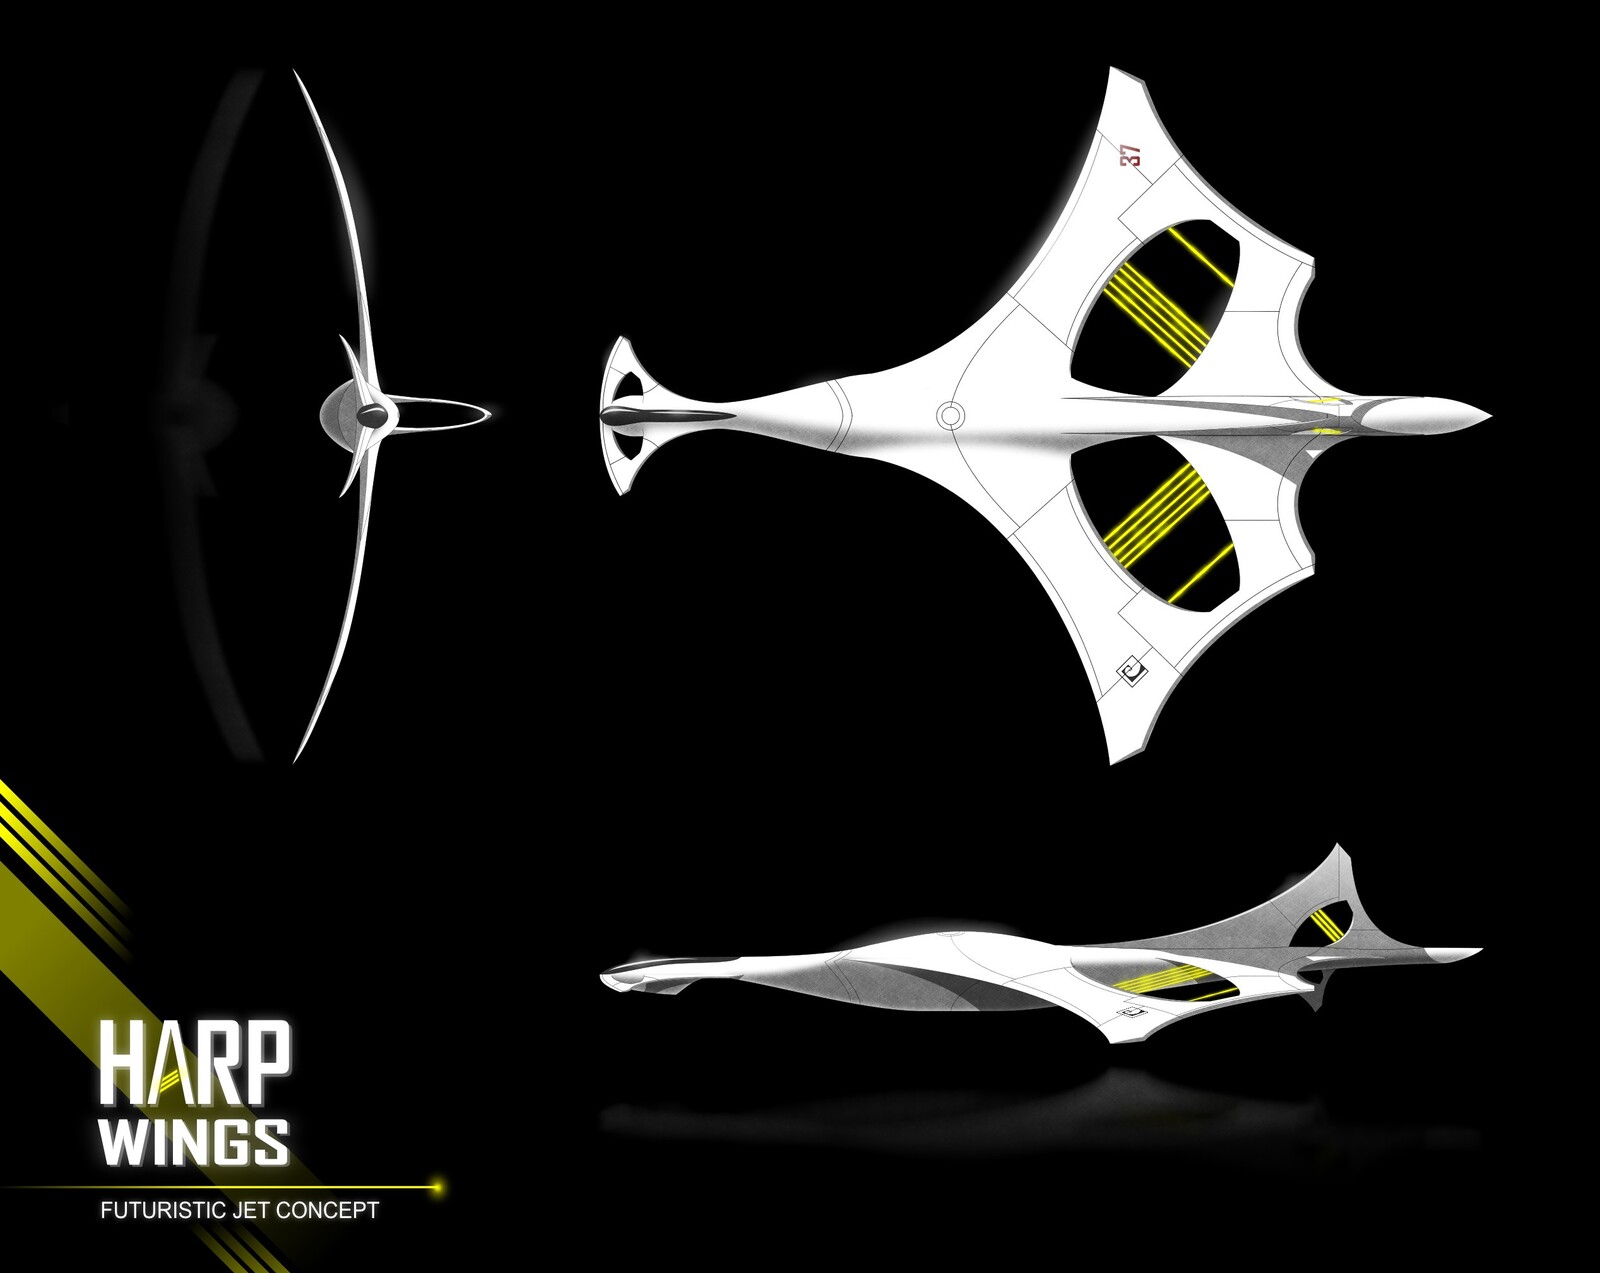 Wing design from a previous concept